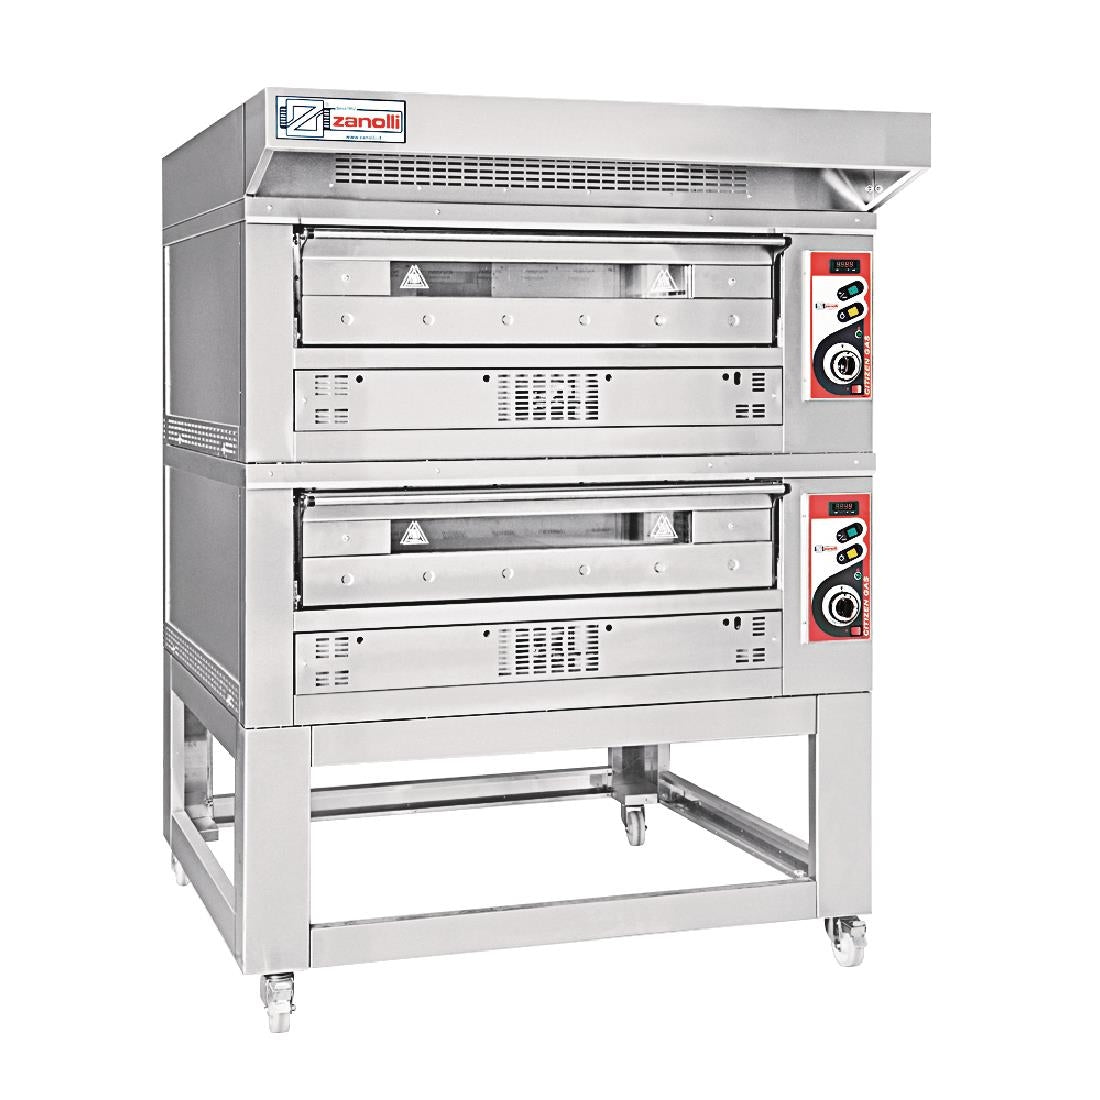 FC745 Stand for Citizen 6 Pizza Oven JD Catering Equipment Solutions Ltd